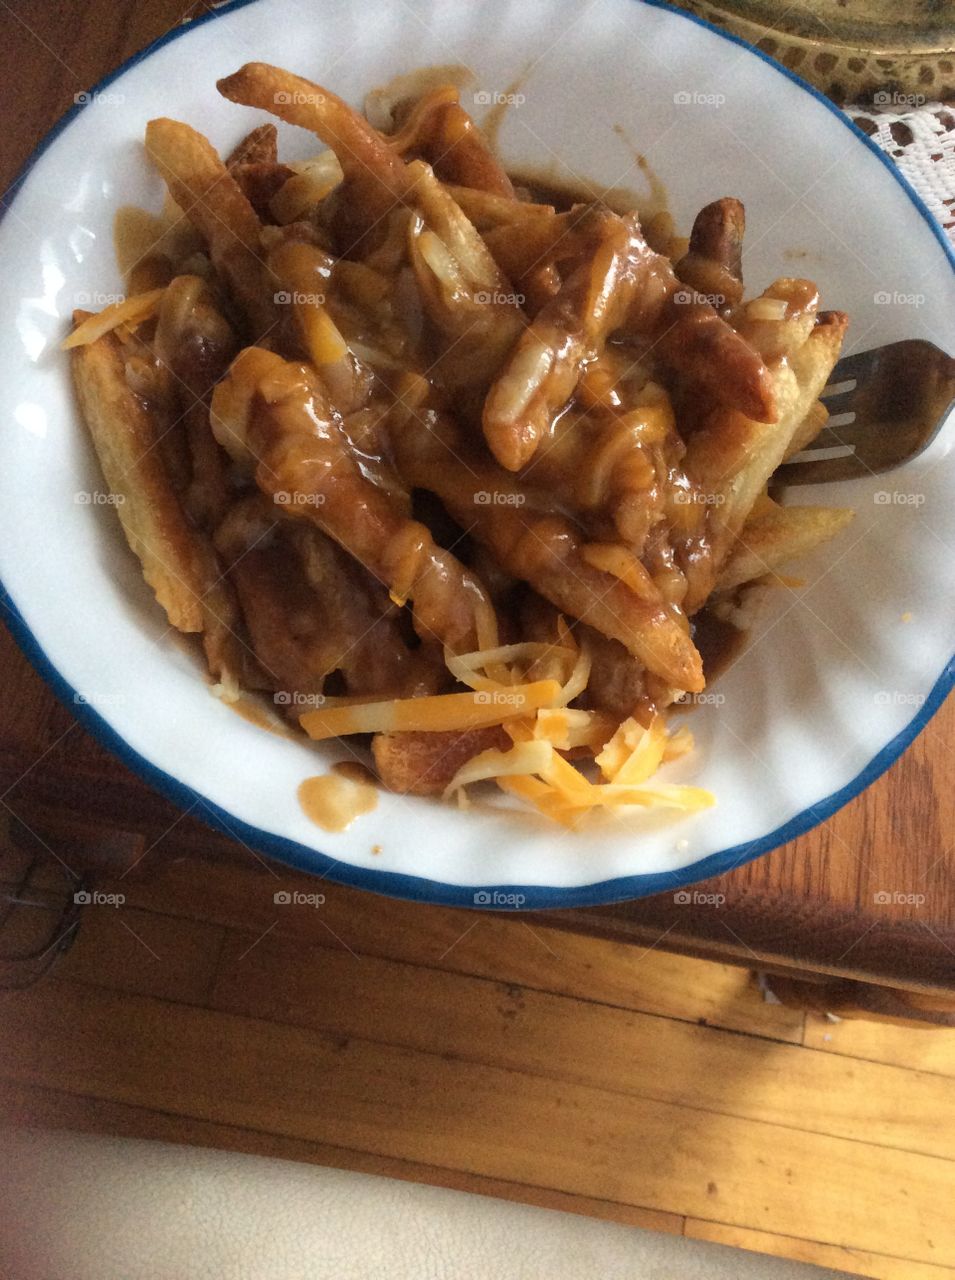 You know your Canadian when you make poutine for dinner 